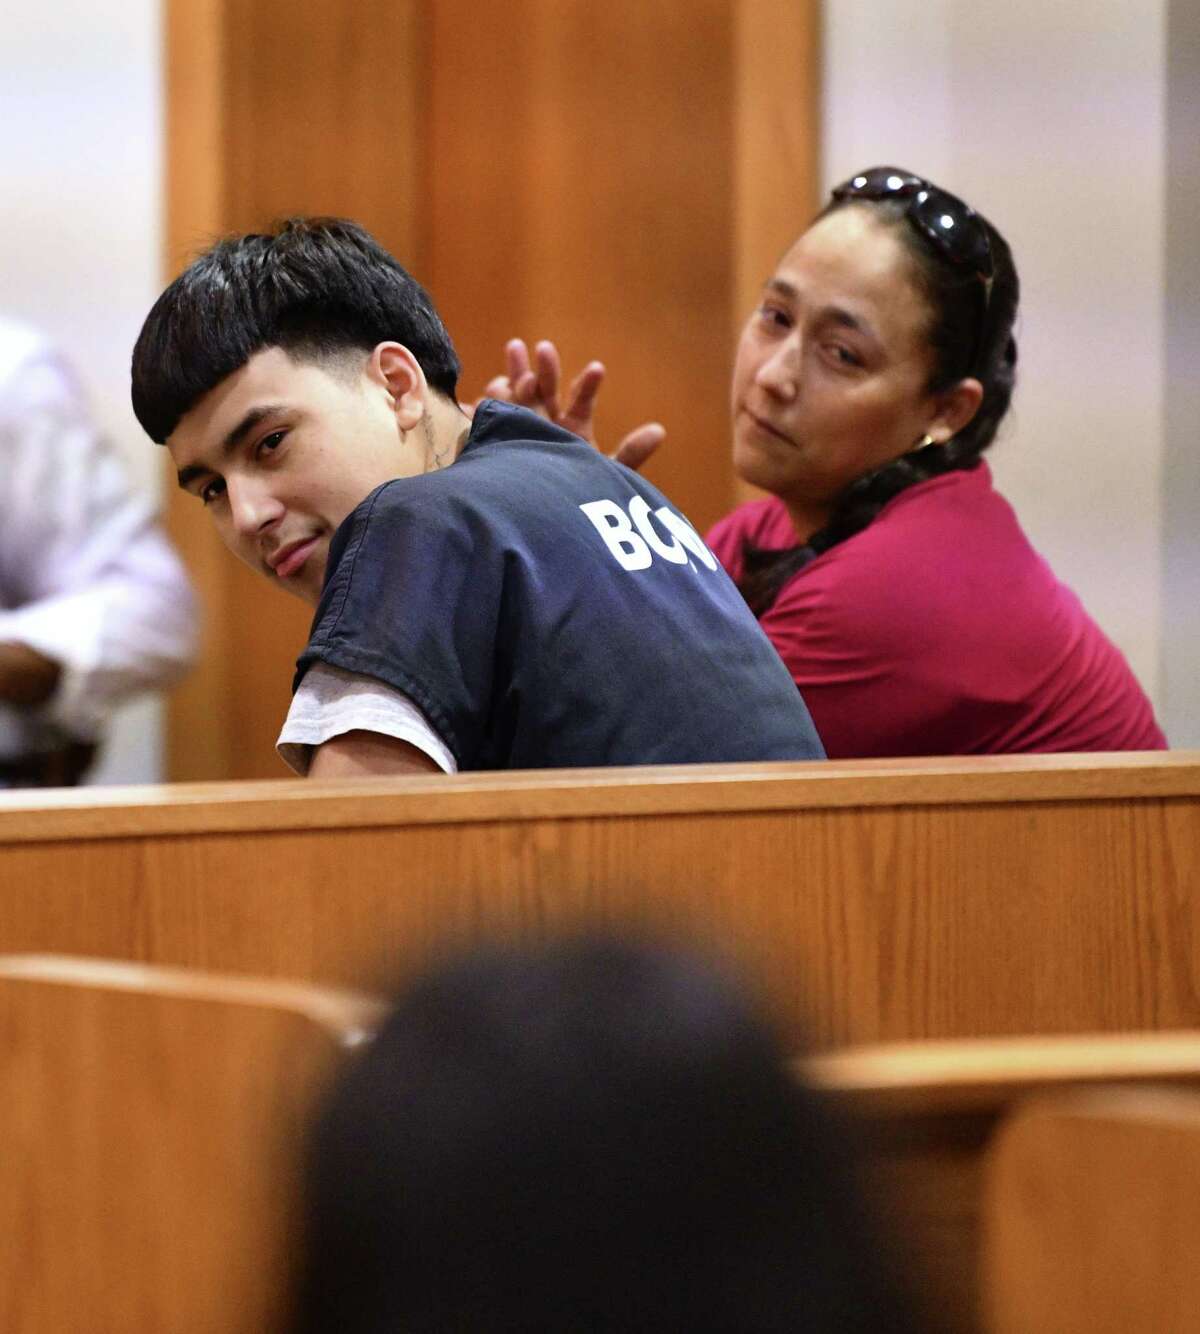 Raul Cervera looks at friends and family as hesits with his mother, Rosenda Armendariz, during a hearing at which he was certified as an adult to stand trial in a capital murder case. Cervera is charged with shooting Abram Garcia IV to death in 2018. Judge Lisa K. Jarrett presided over the hearing on Tuesday, April 16, 2019.